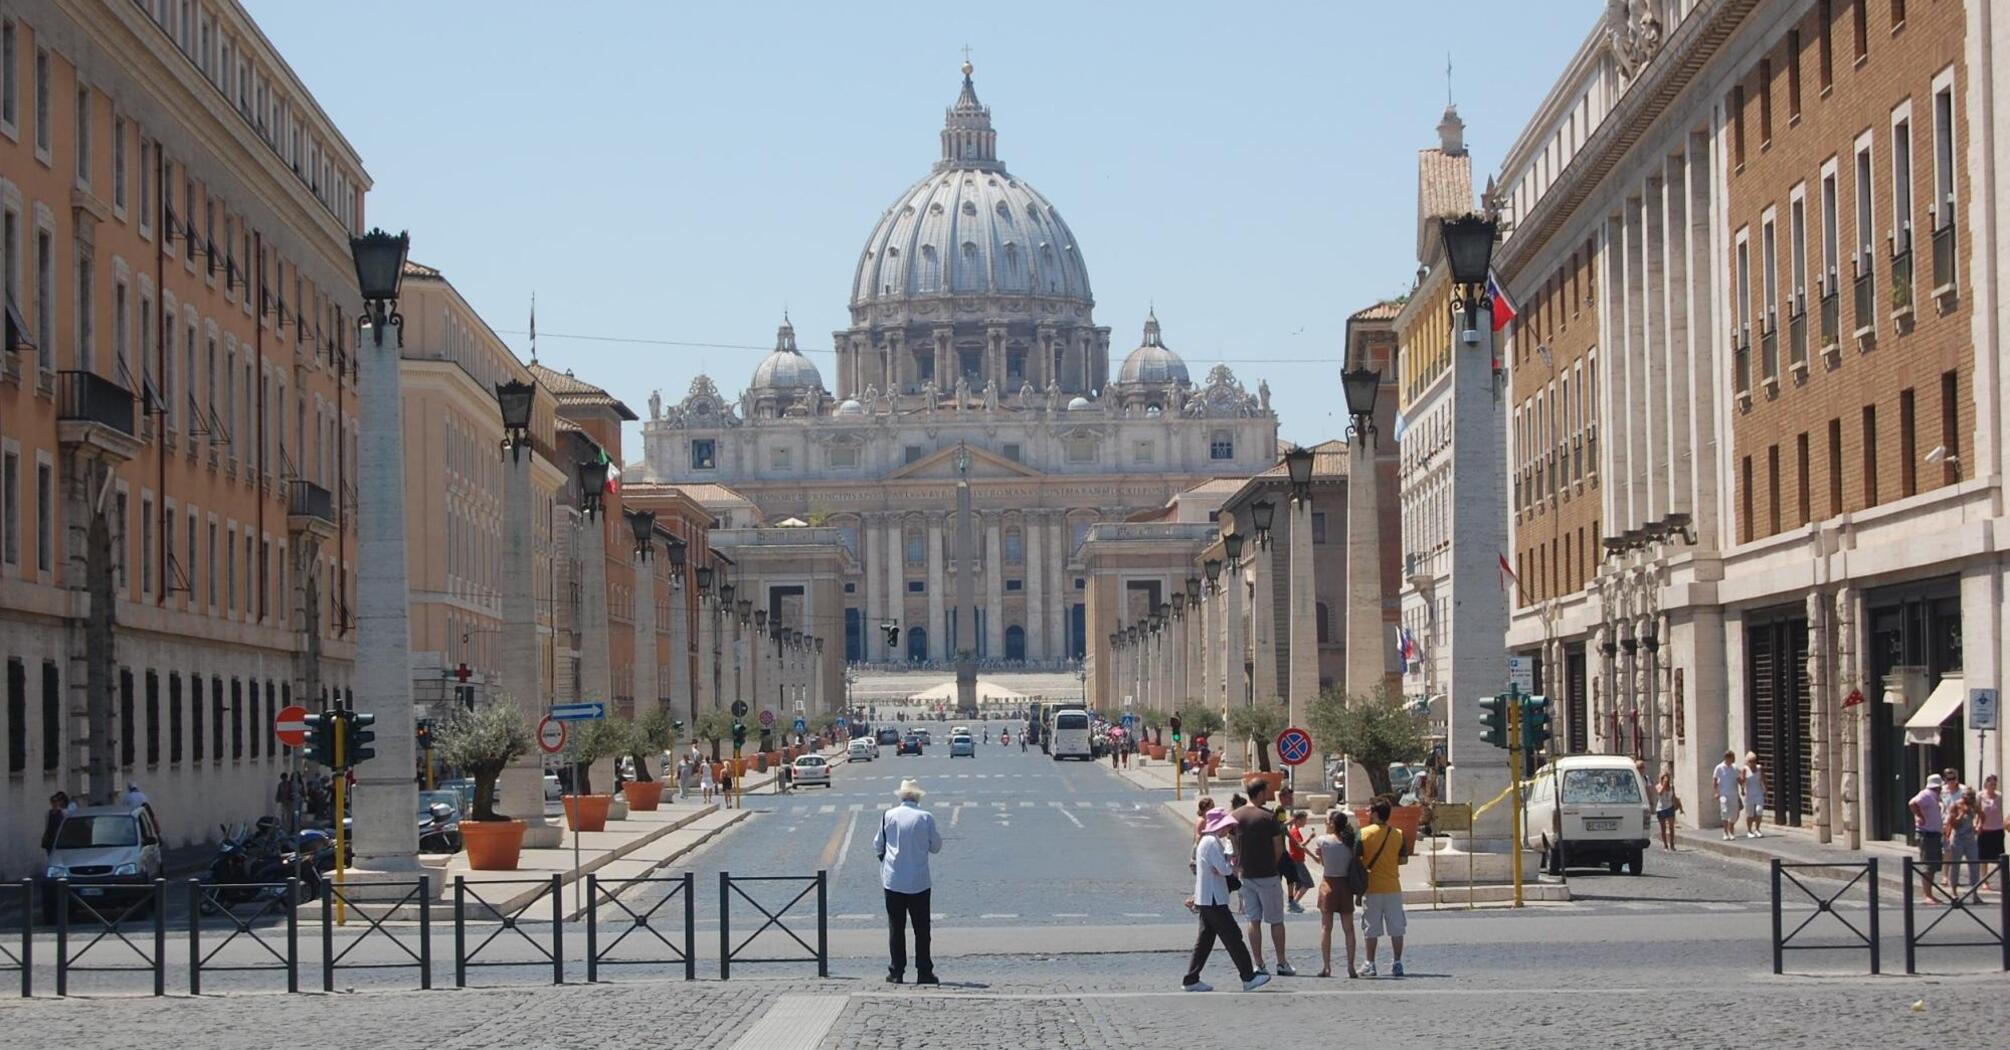 St. Peter's Basilica, Vatican, street in Rome, tourists